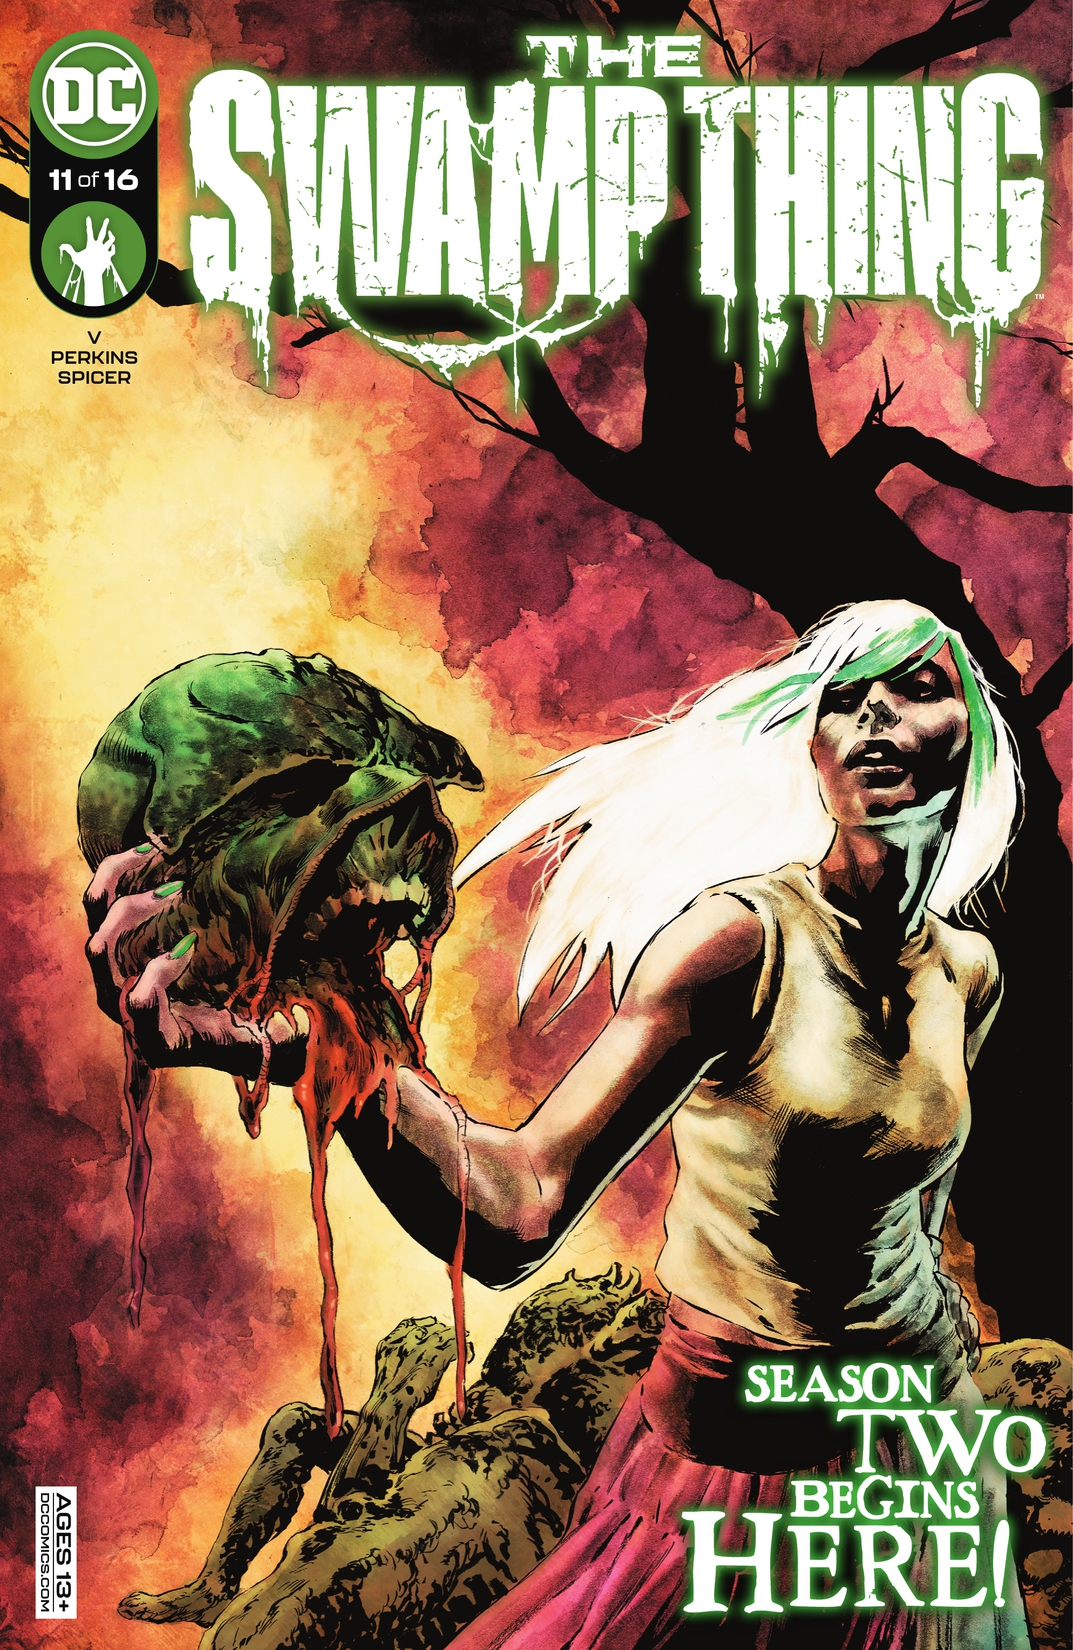 The Swamp Thing #11 preview images